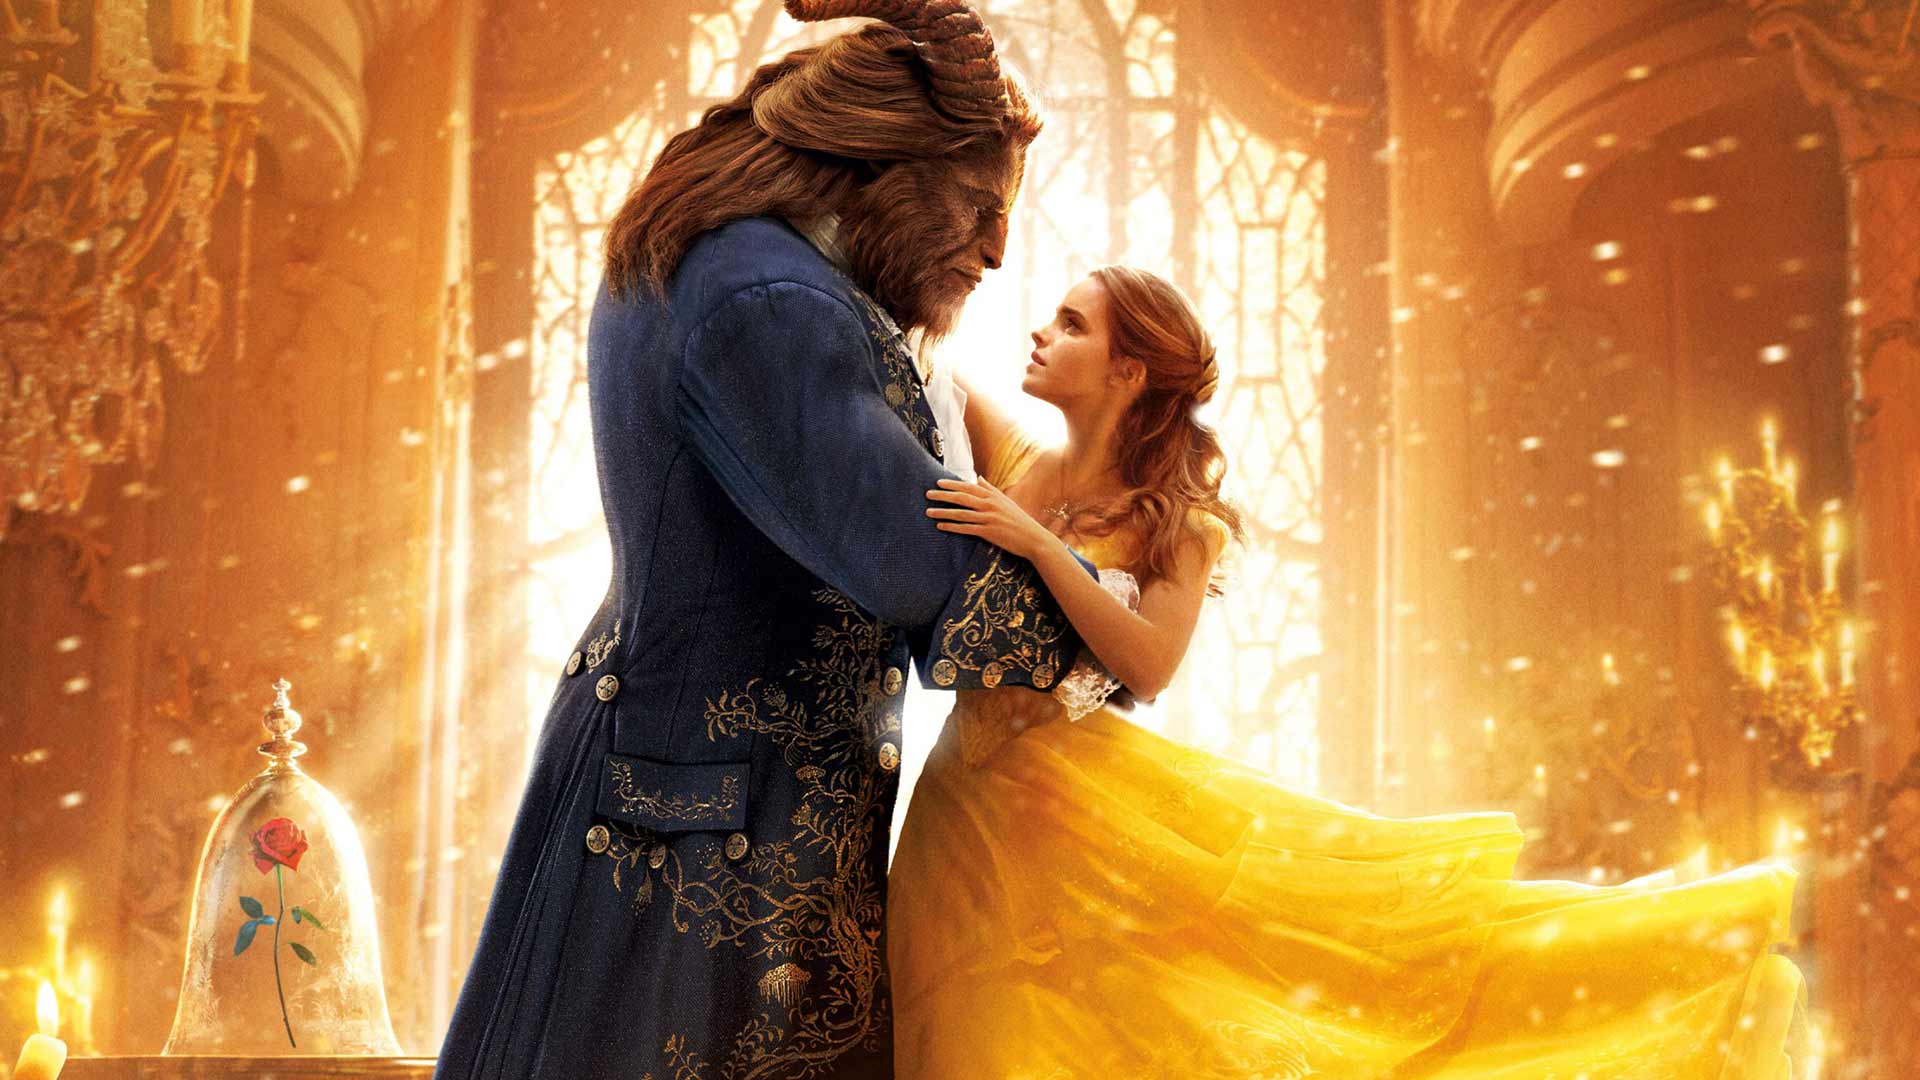 Disney Owes Thousands for Infringing Visual Effects Tech To Make “Beauty and the Beast”